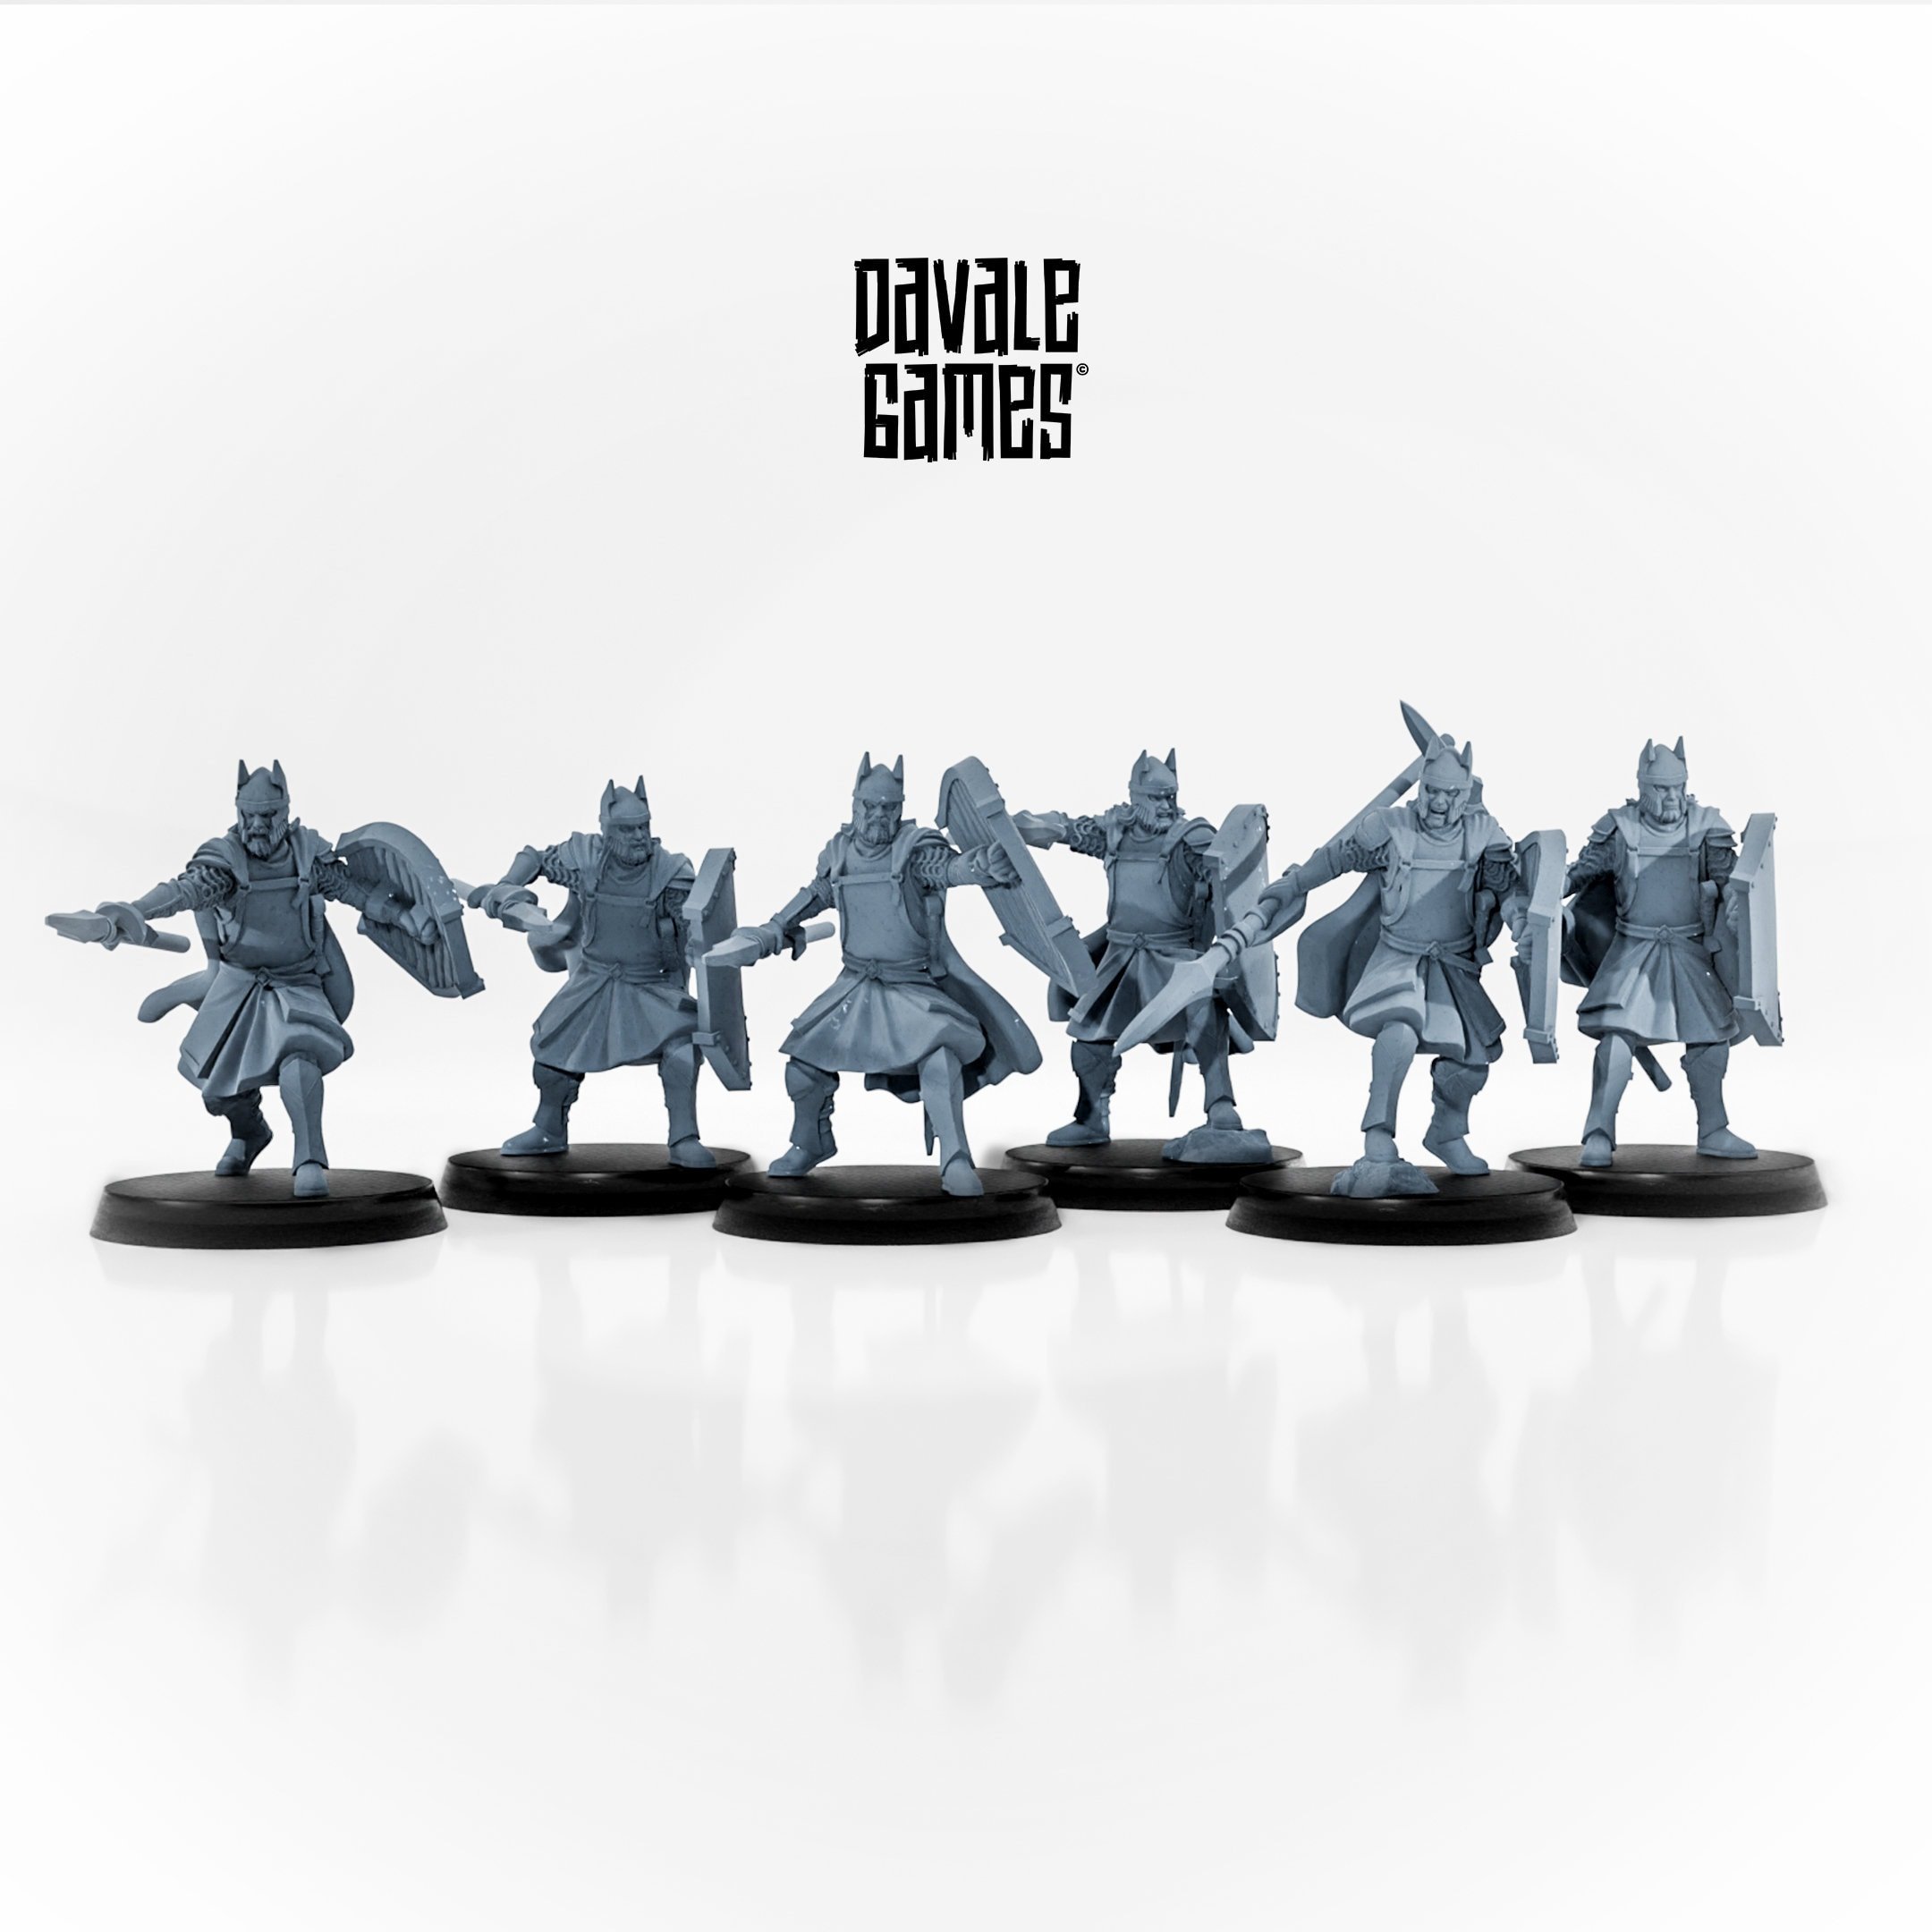 High Human Spearmen wargaming miniatures by Davale Games 3D printed by Forgemaster Miniatures